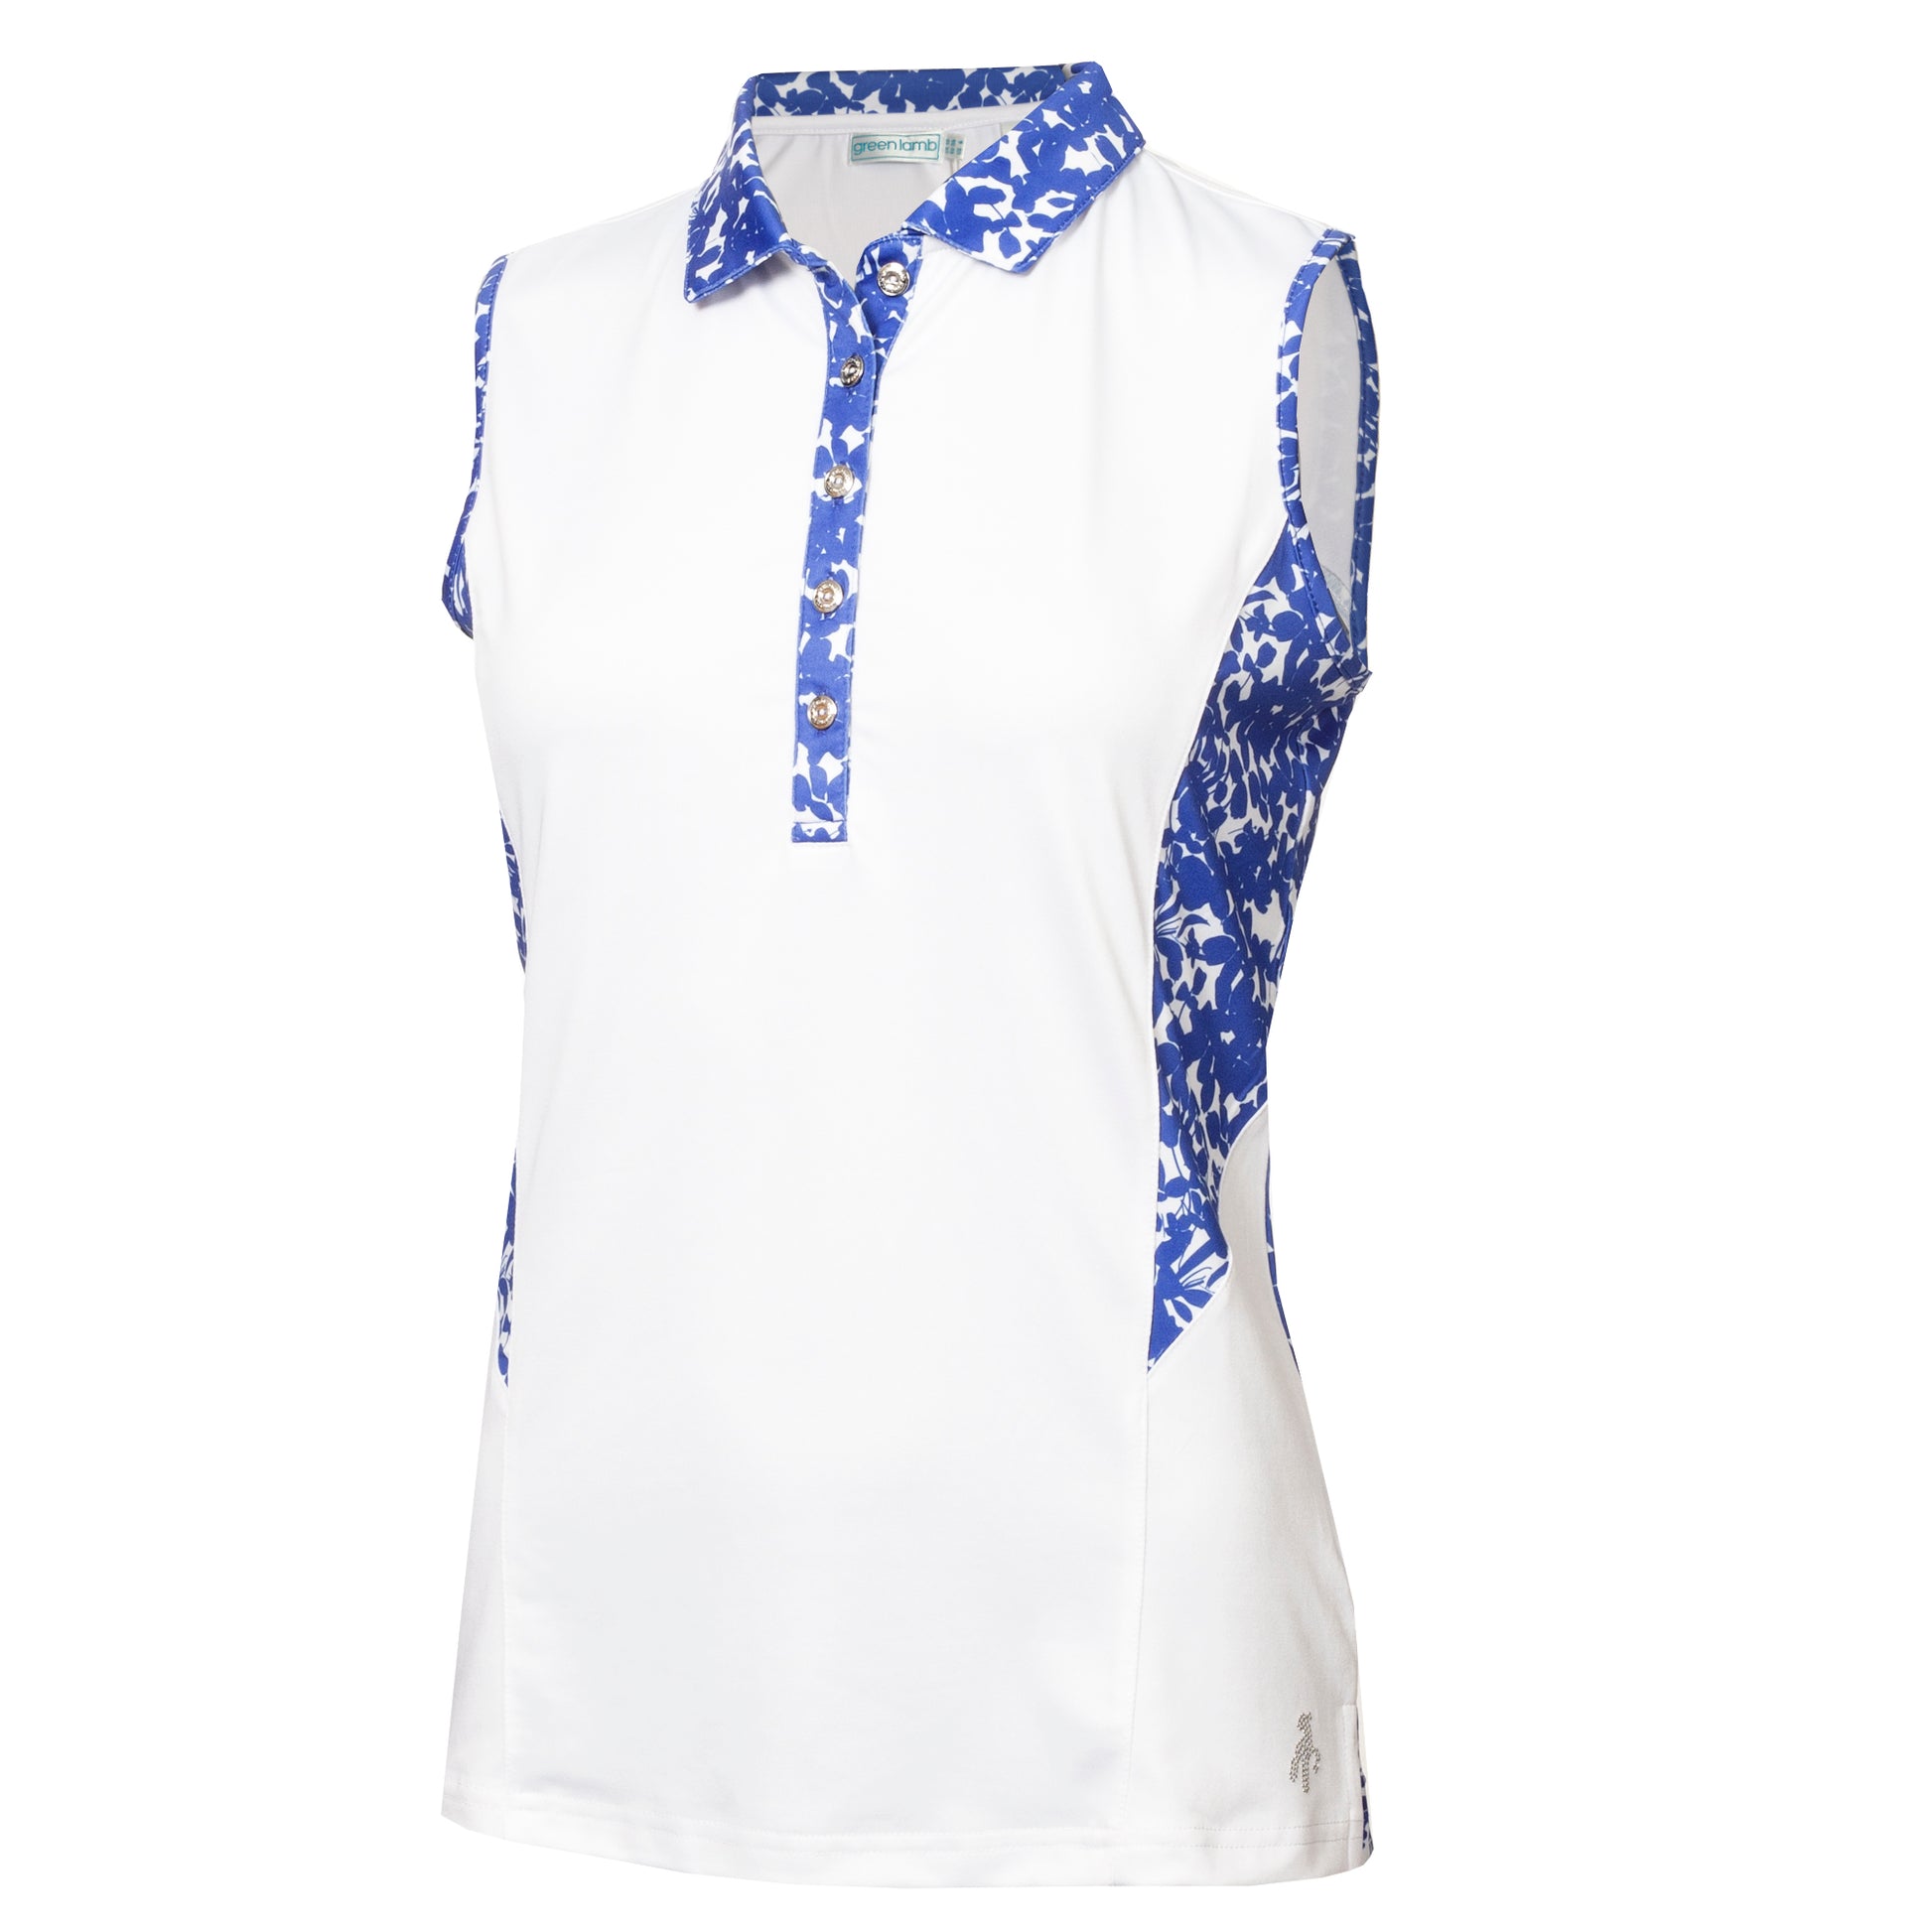 Green Lamb Ladies Sleeveless Polo Shirt with Contrasting Panels in White & Floral Print